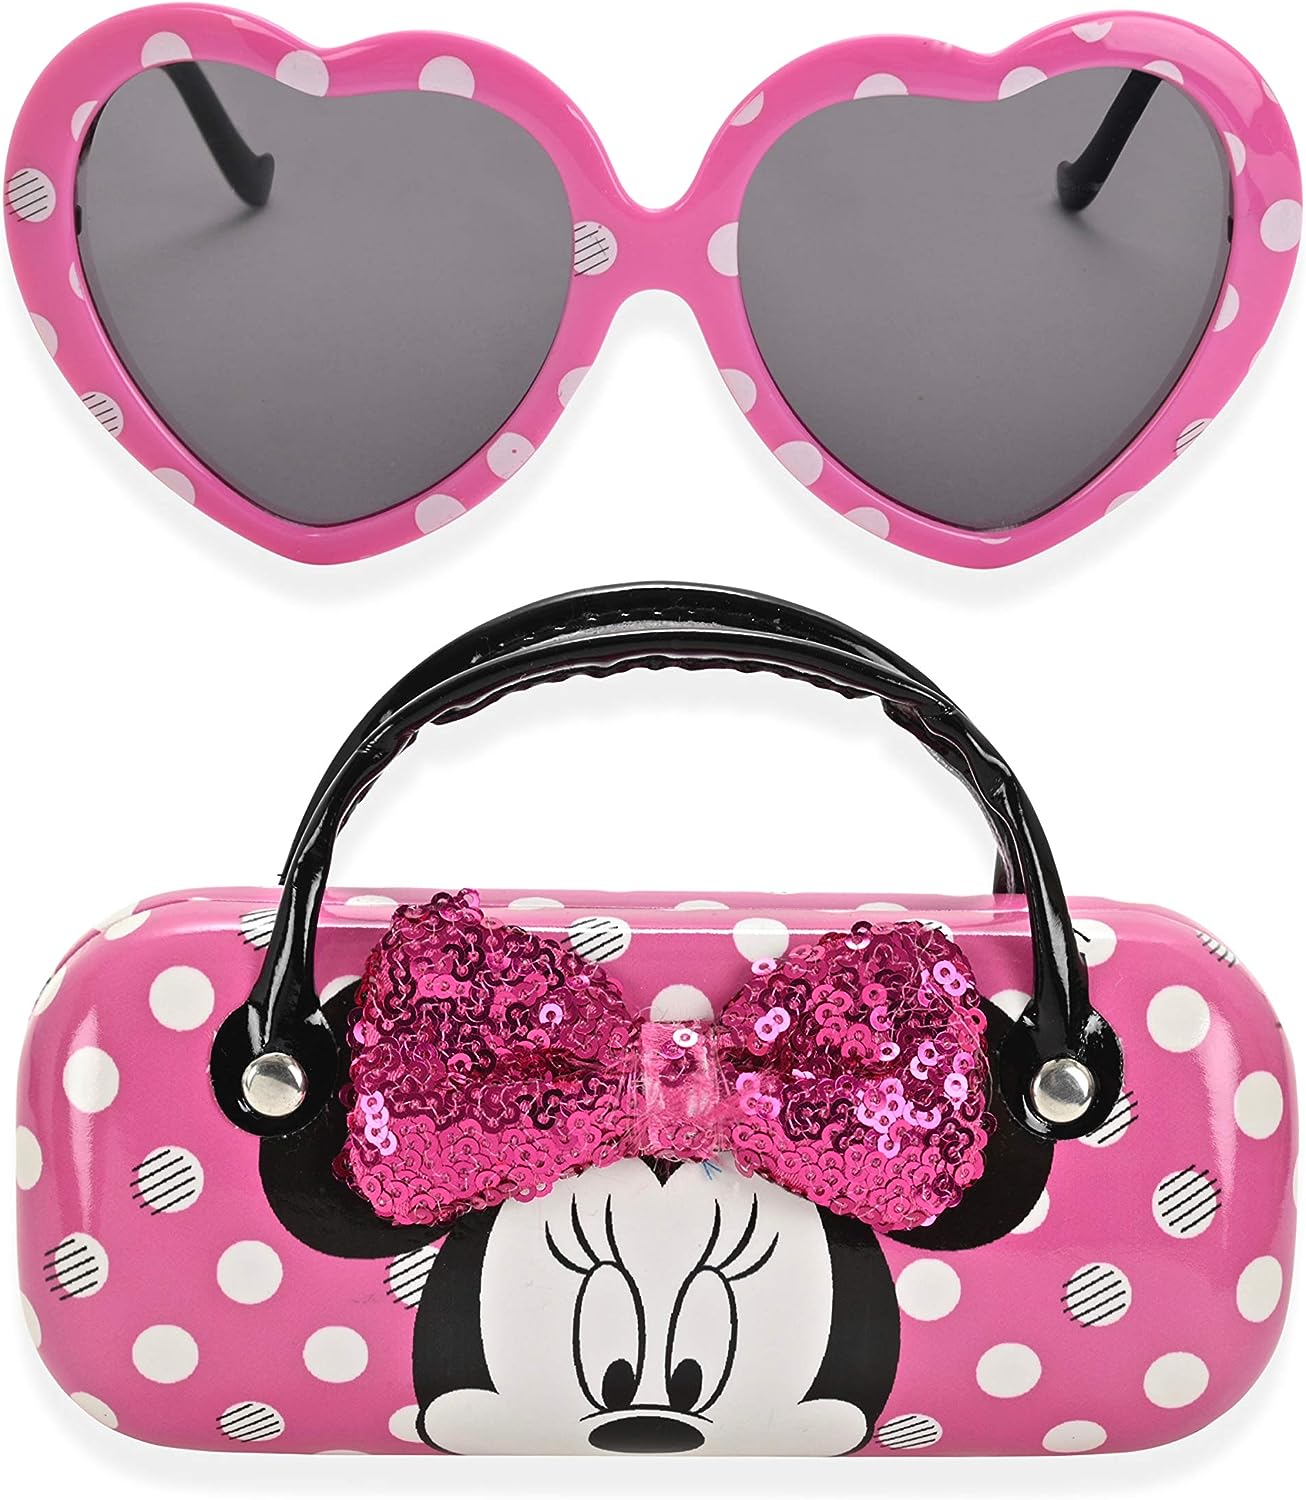 Minnie Mouse Kids Sunglasses for Girls, Toddler [...]